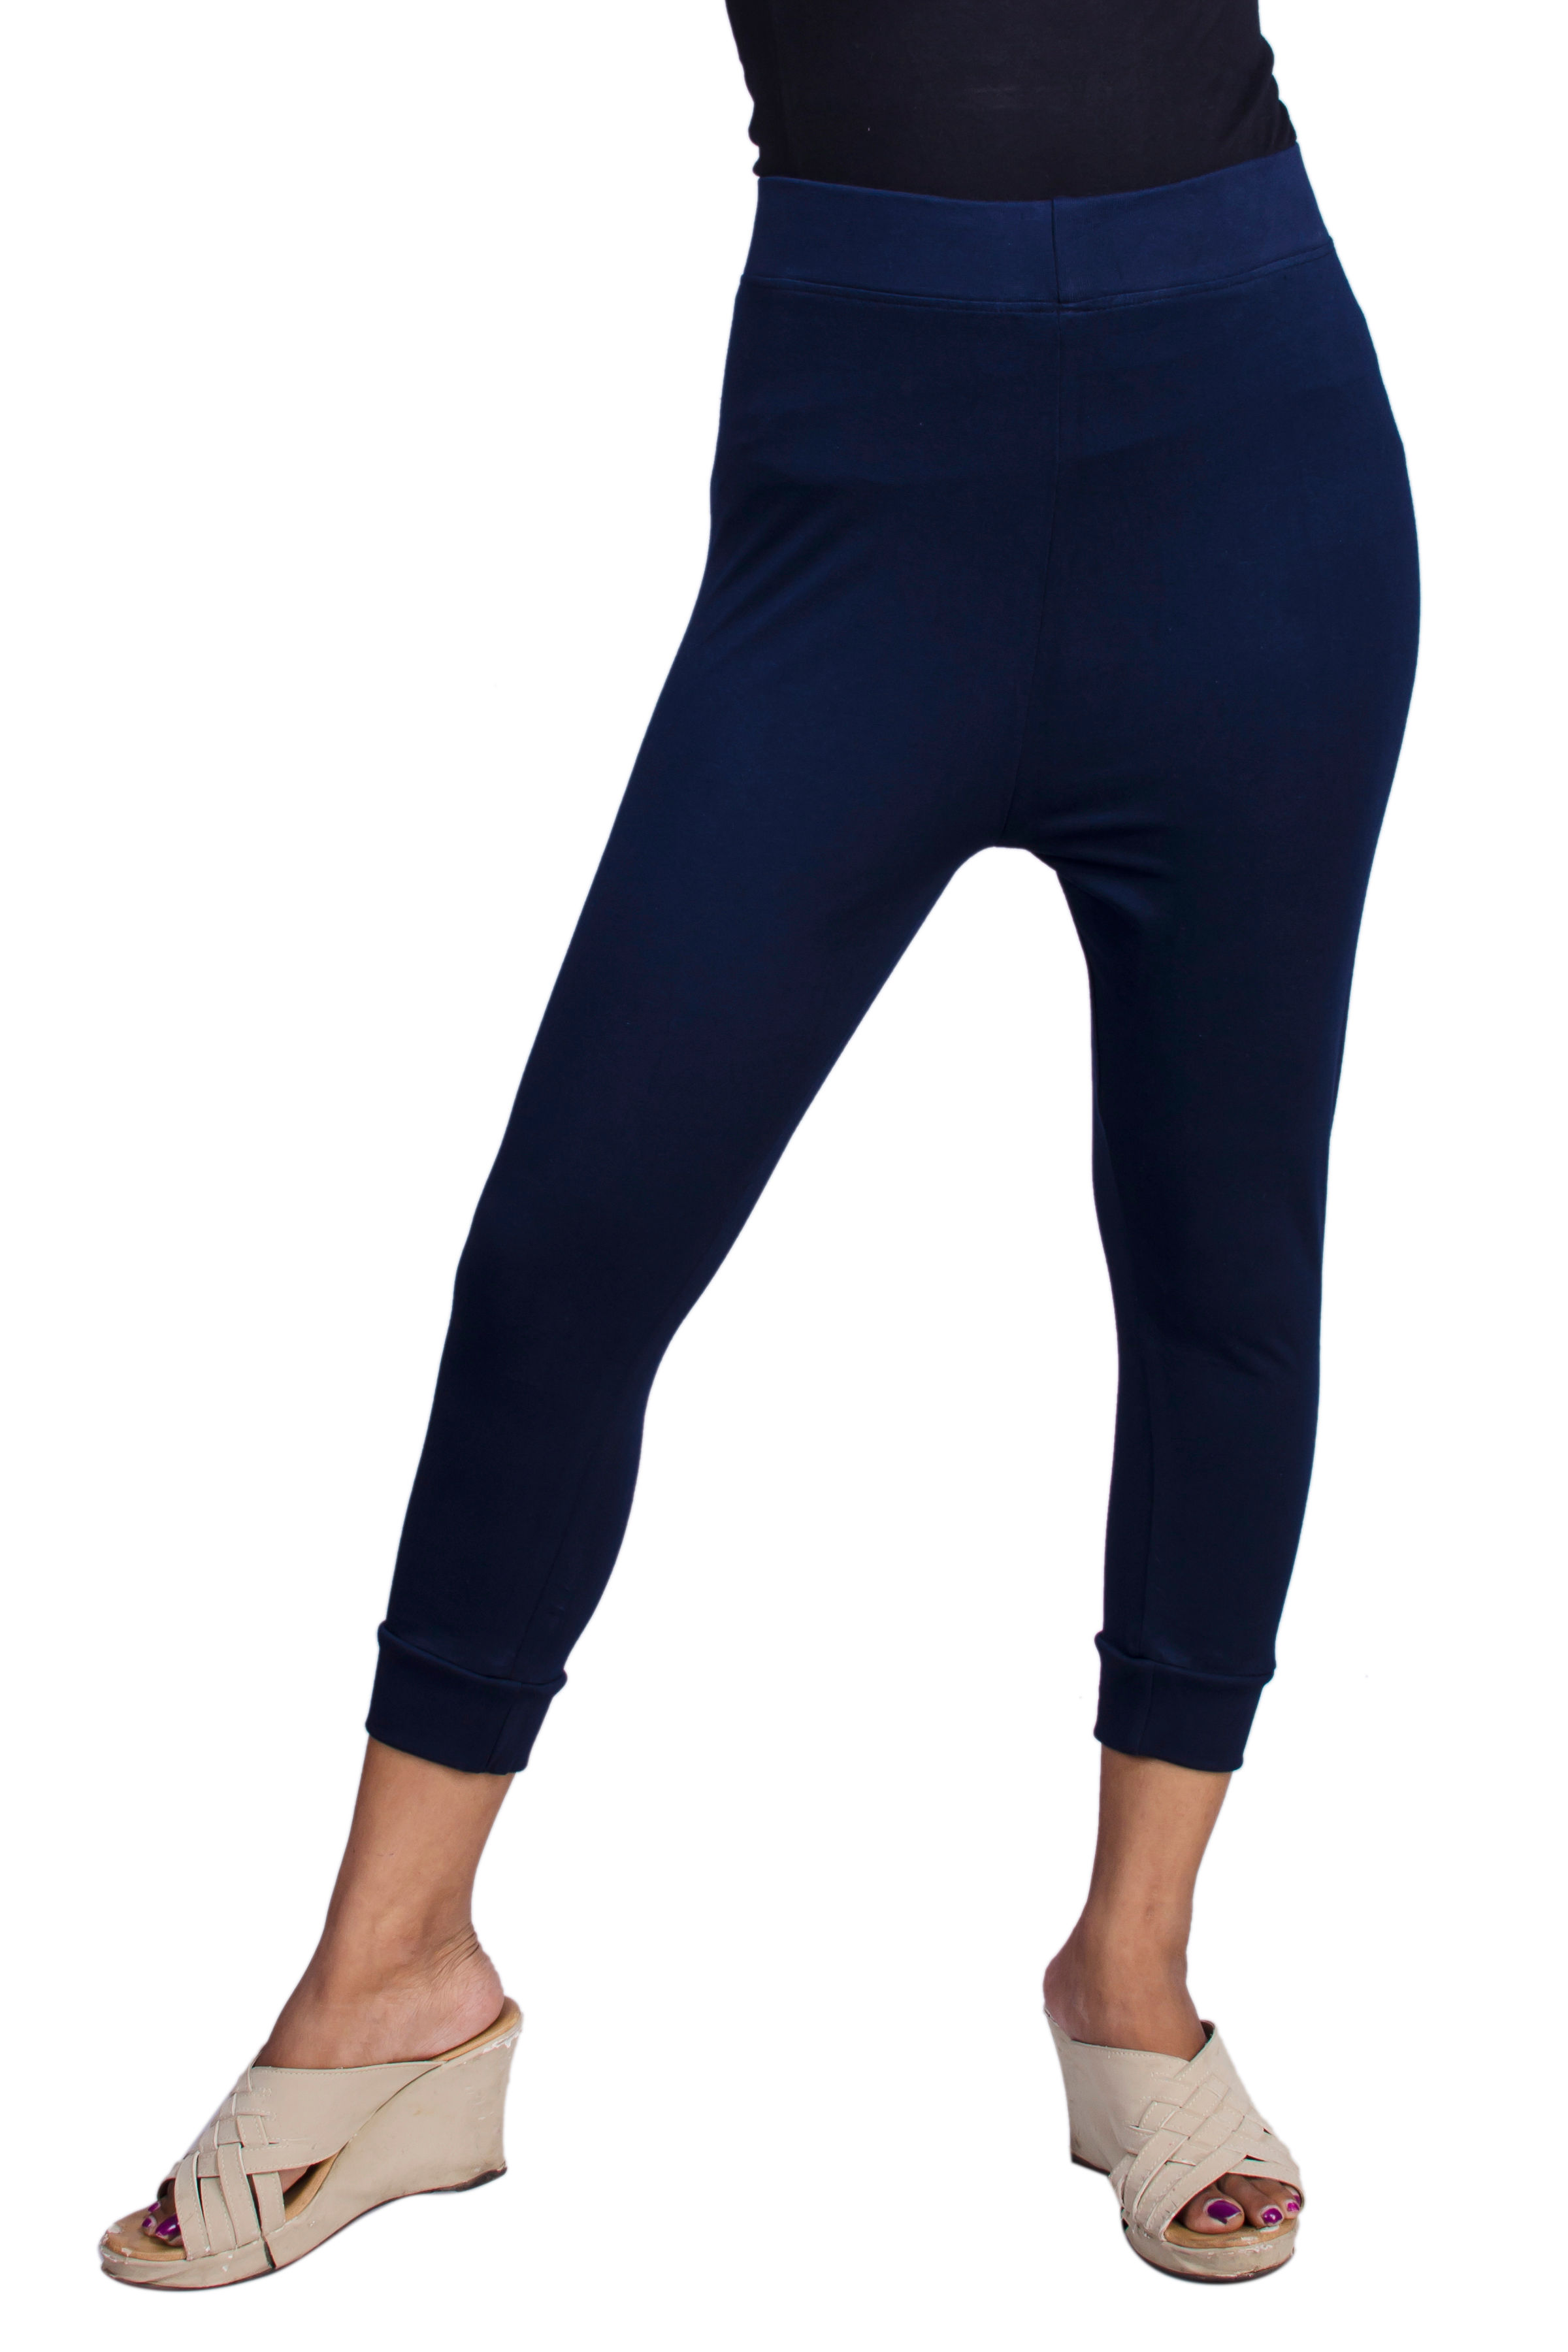 Yoga Pants Manufacturers India  International Society of Precision  Agriculture